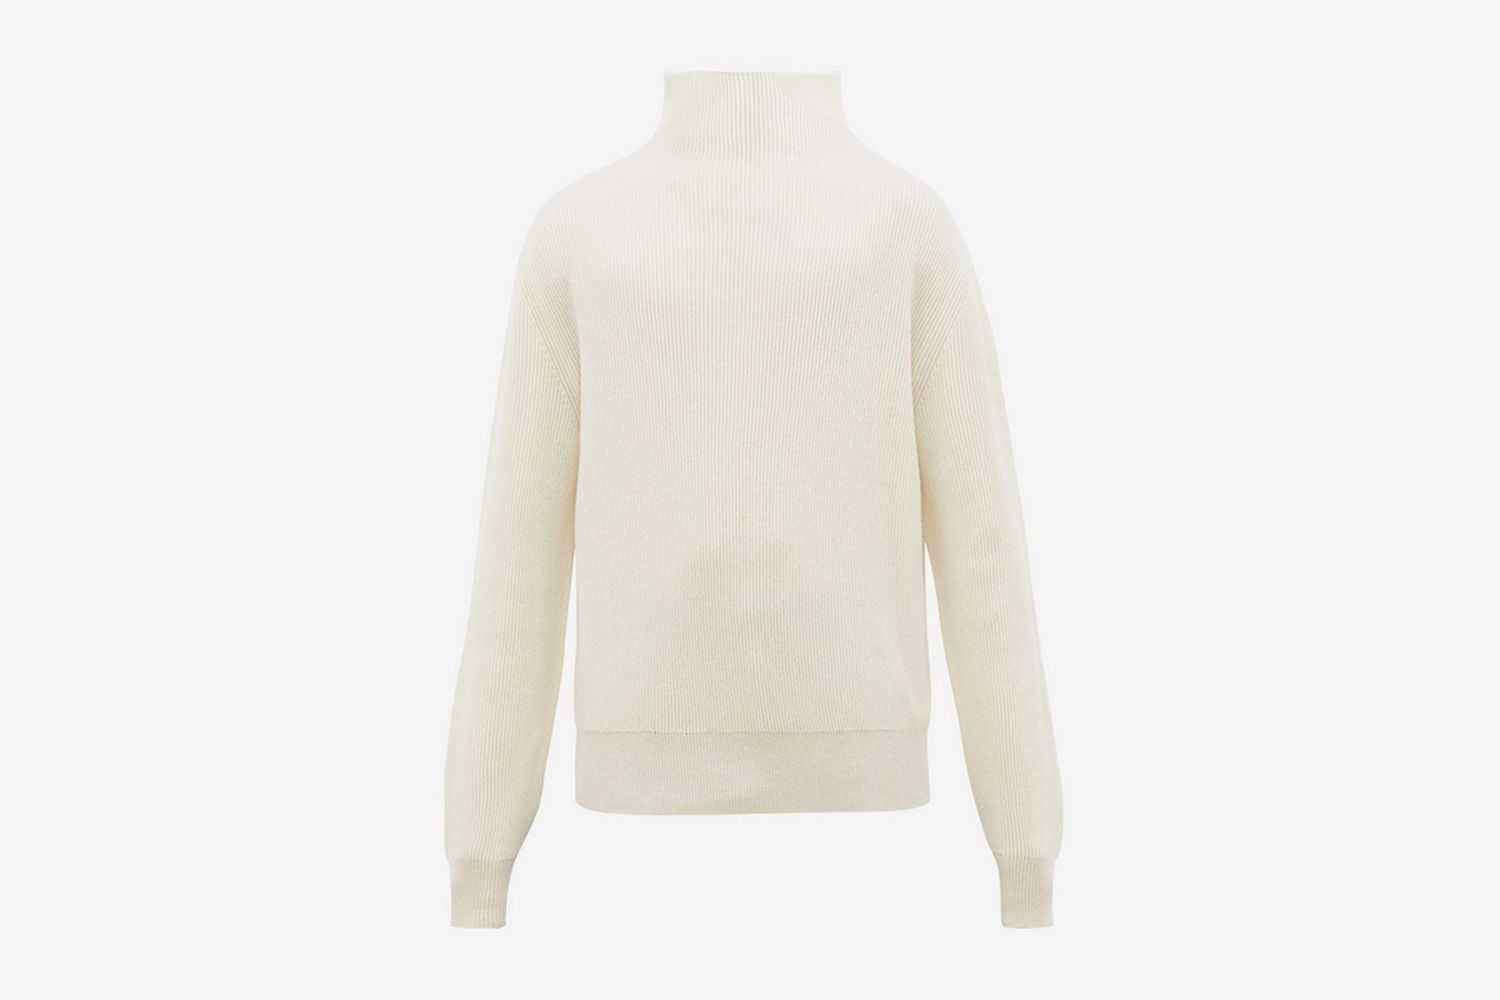 Daniel Roll-Neck Ribbed Cashmere Sweater